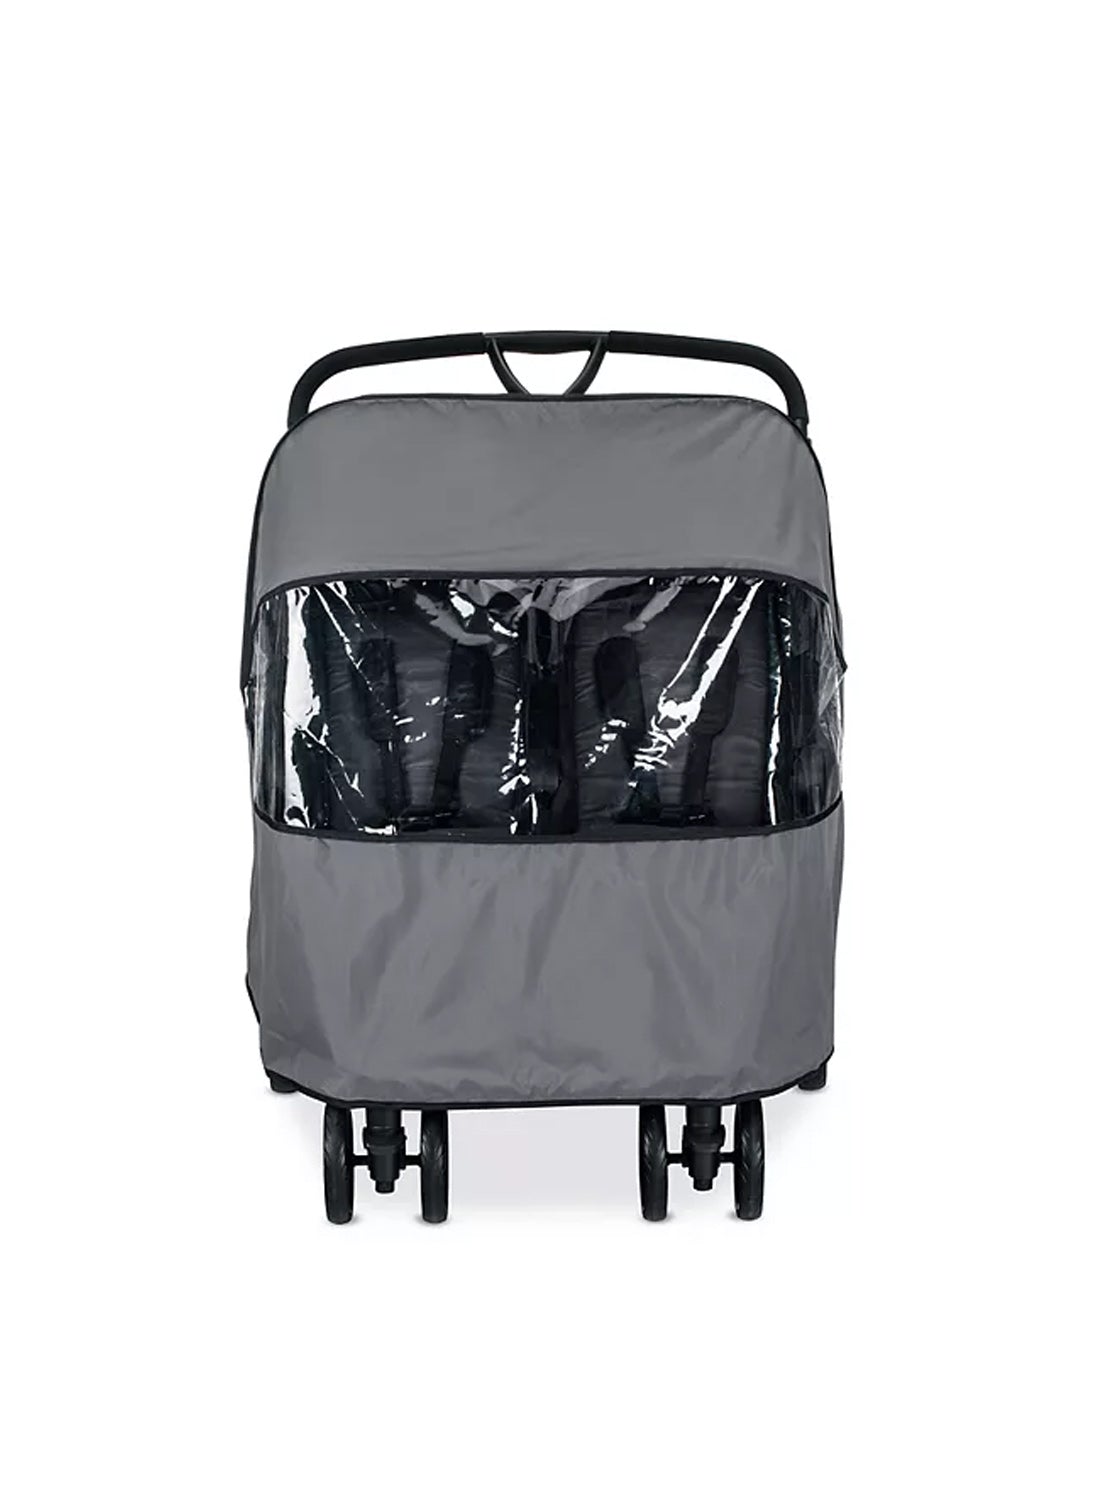 Britax B-Lively Double Stroller Wind and Rain Stroller - ANB Baby -$50 - $75